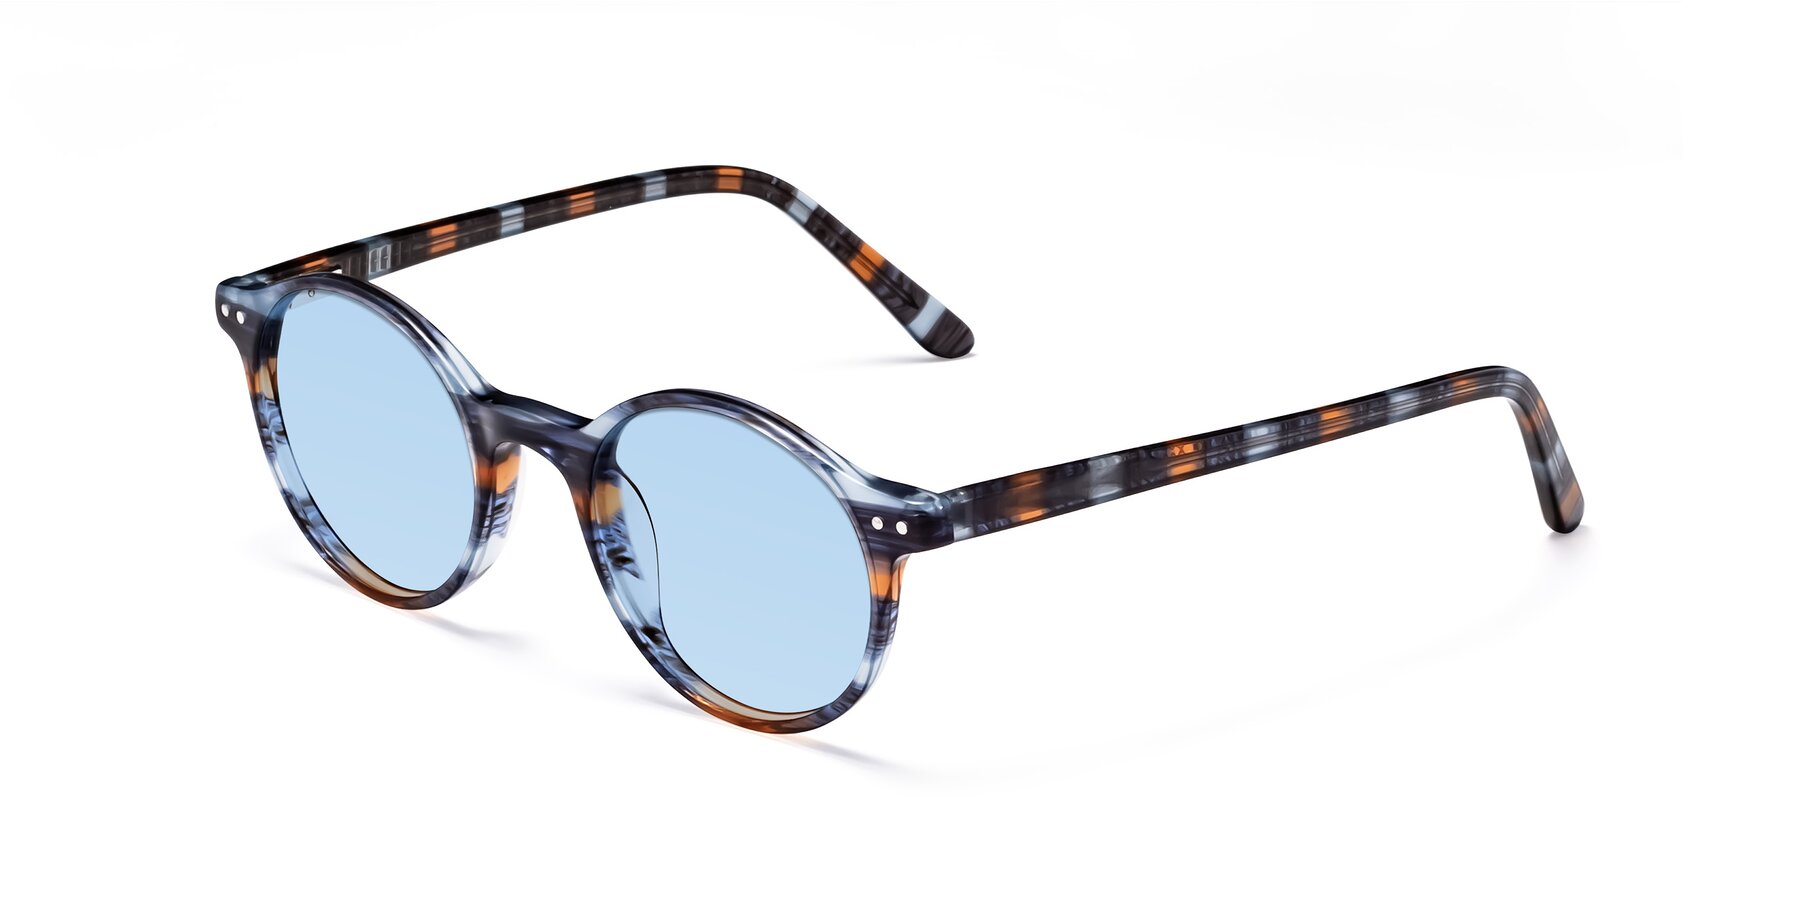 Angle of Jardi in Stripe Blue Brown with Light Blue Tinted Lenses